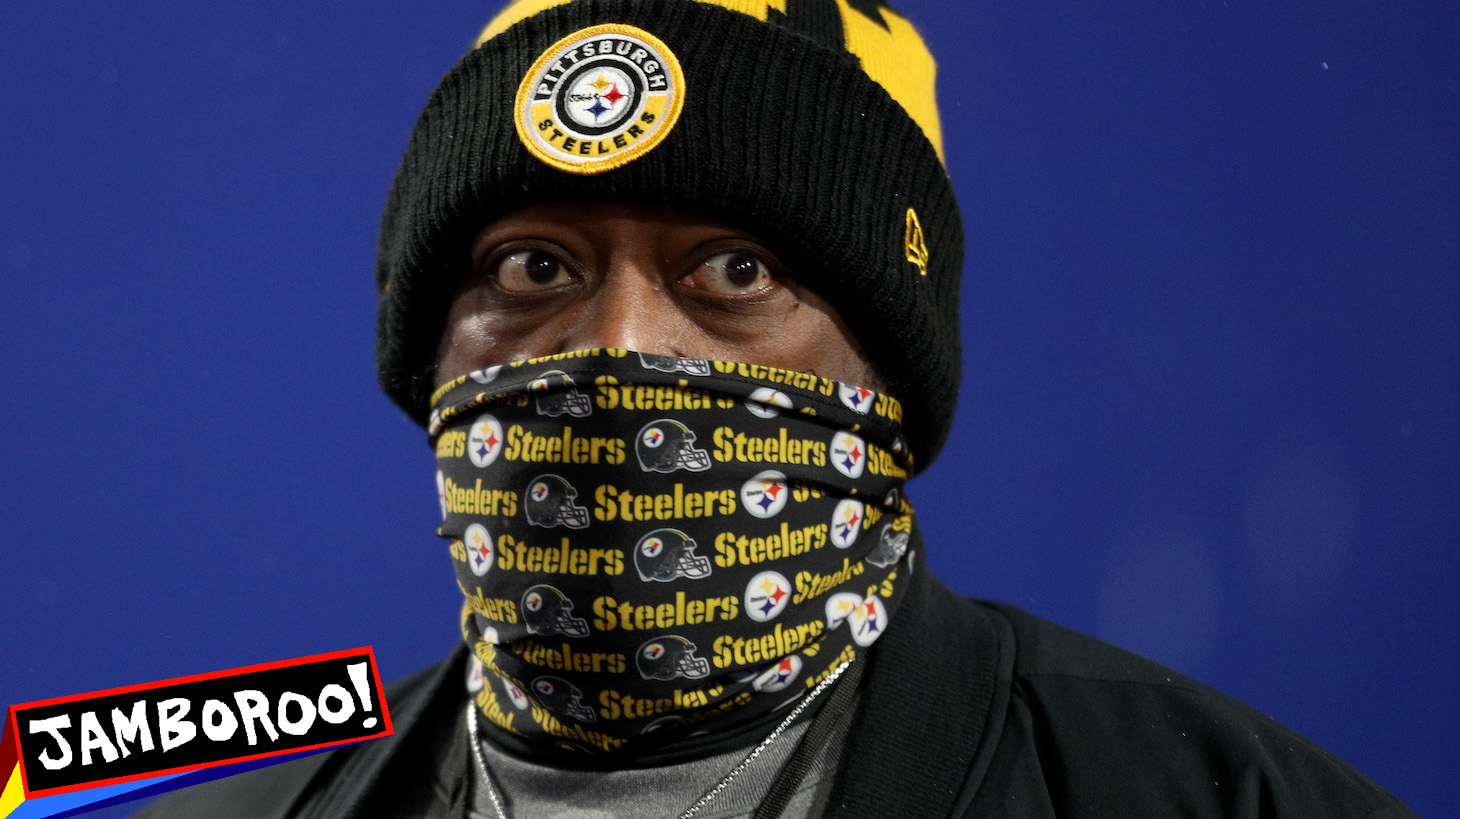 ORCHARD PARK, NEW YORK - DECEMBER 13: Head coach Mike Tomlin of the Pittsburgh Steelers looks on before the game against the Buffalo Bills at Bills Stadium on December 13, 2020 in Orchard Park, New York. (Photo by Bryan M. Bennett/Getty Images)